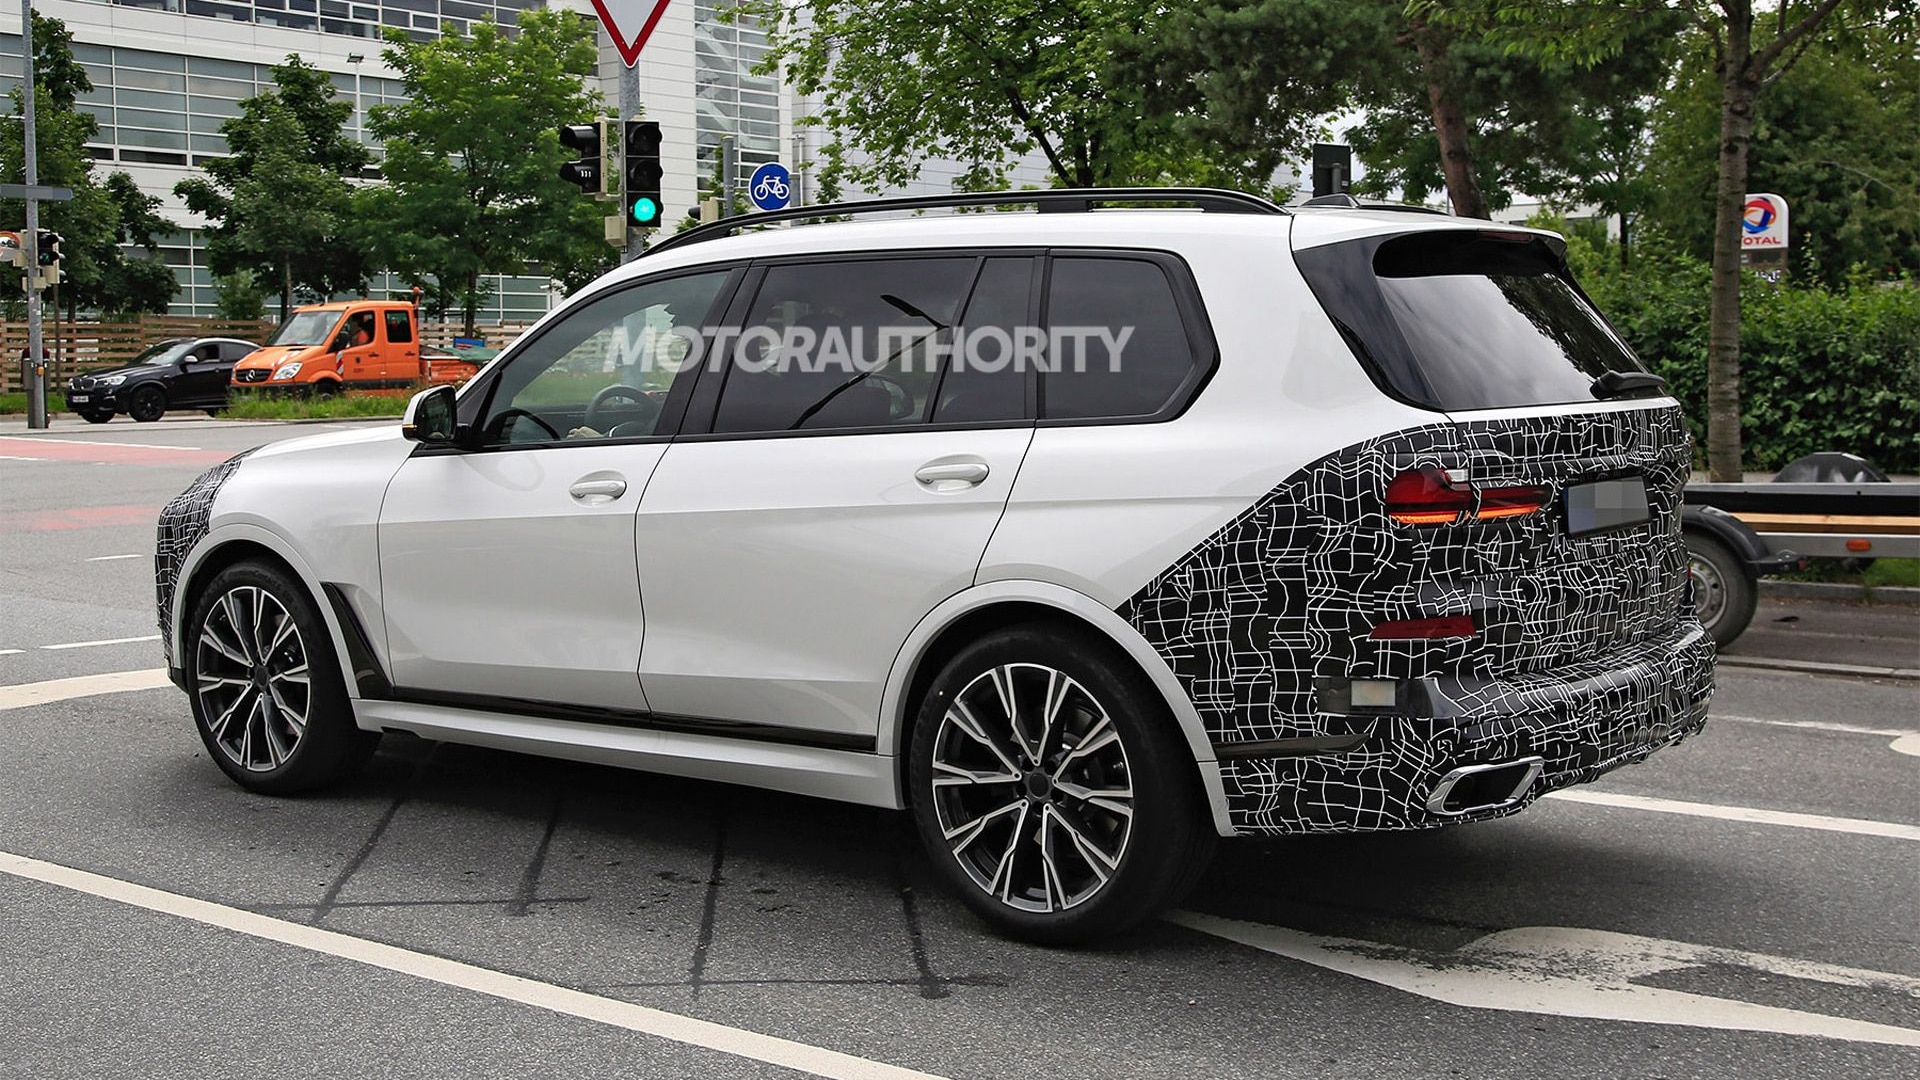 2023 BMW X7 spy shots: Heavy styling update set for big crossover